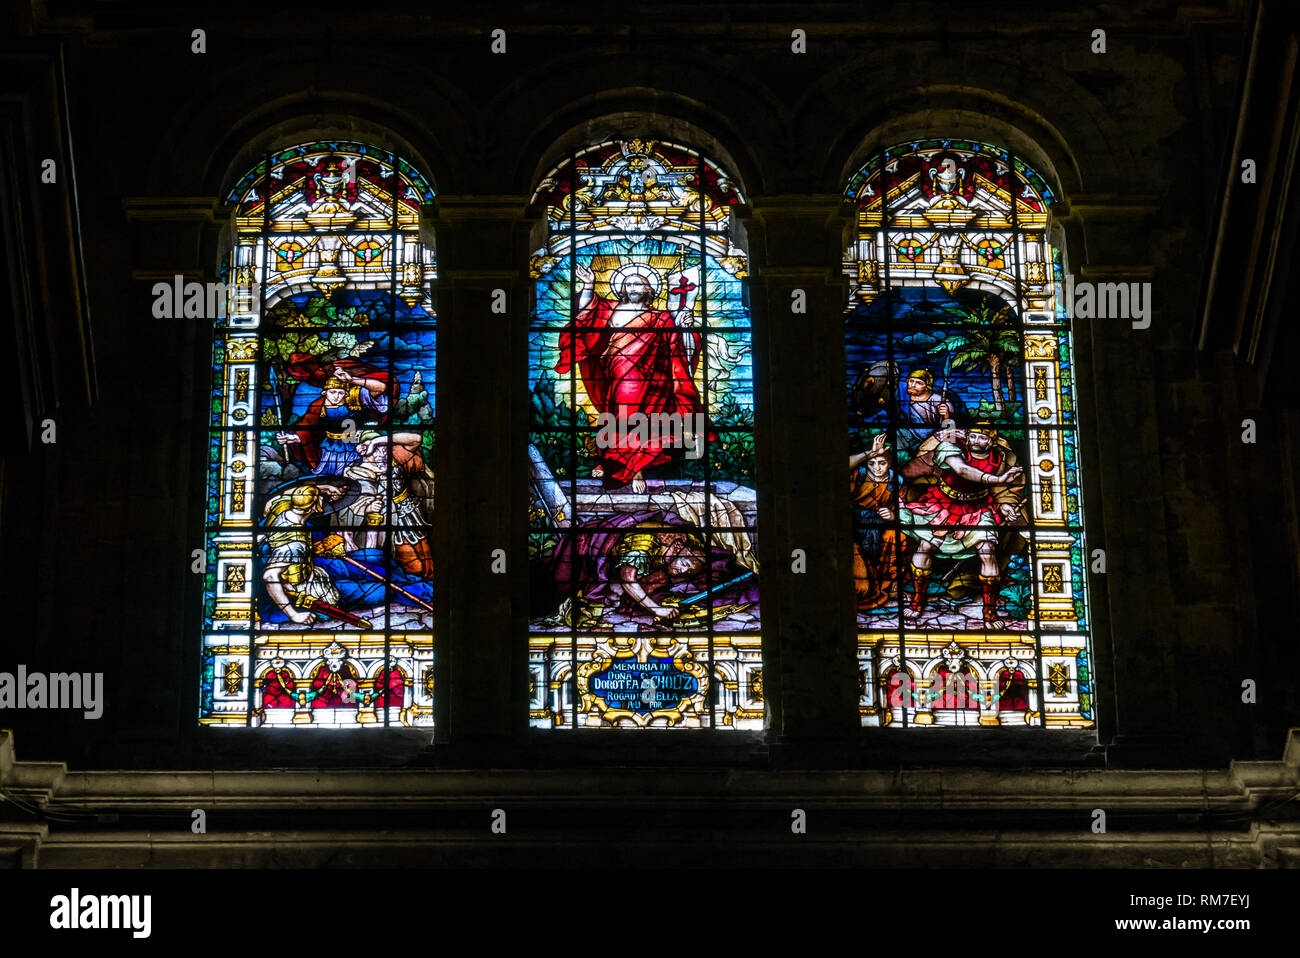 Stained glass window depicting Jesus rising from the grave, Malaga Cathedral, Andalusia, Spain Stock Photo